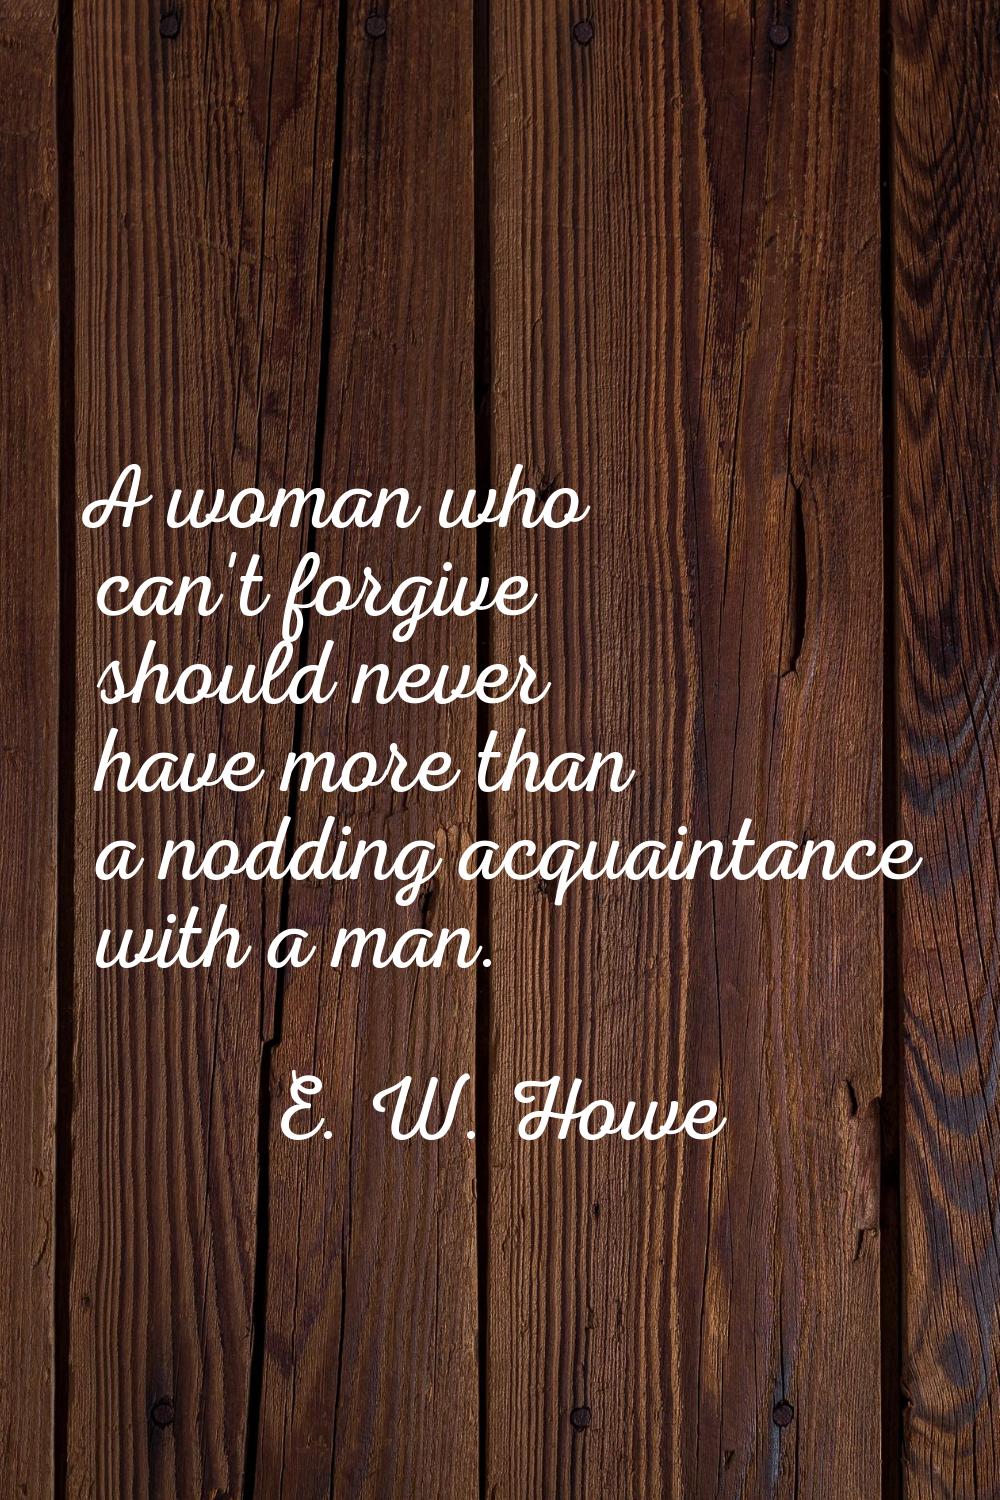 A woman who can't forgive should never have more than a nodding acquaintance with a man.